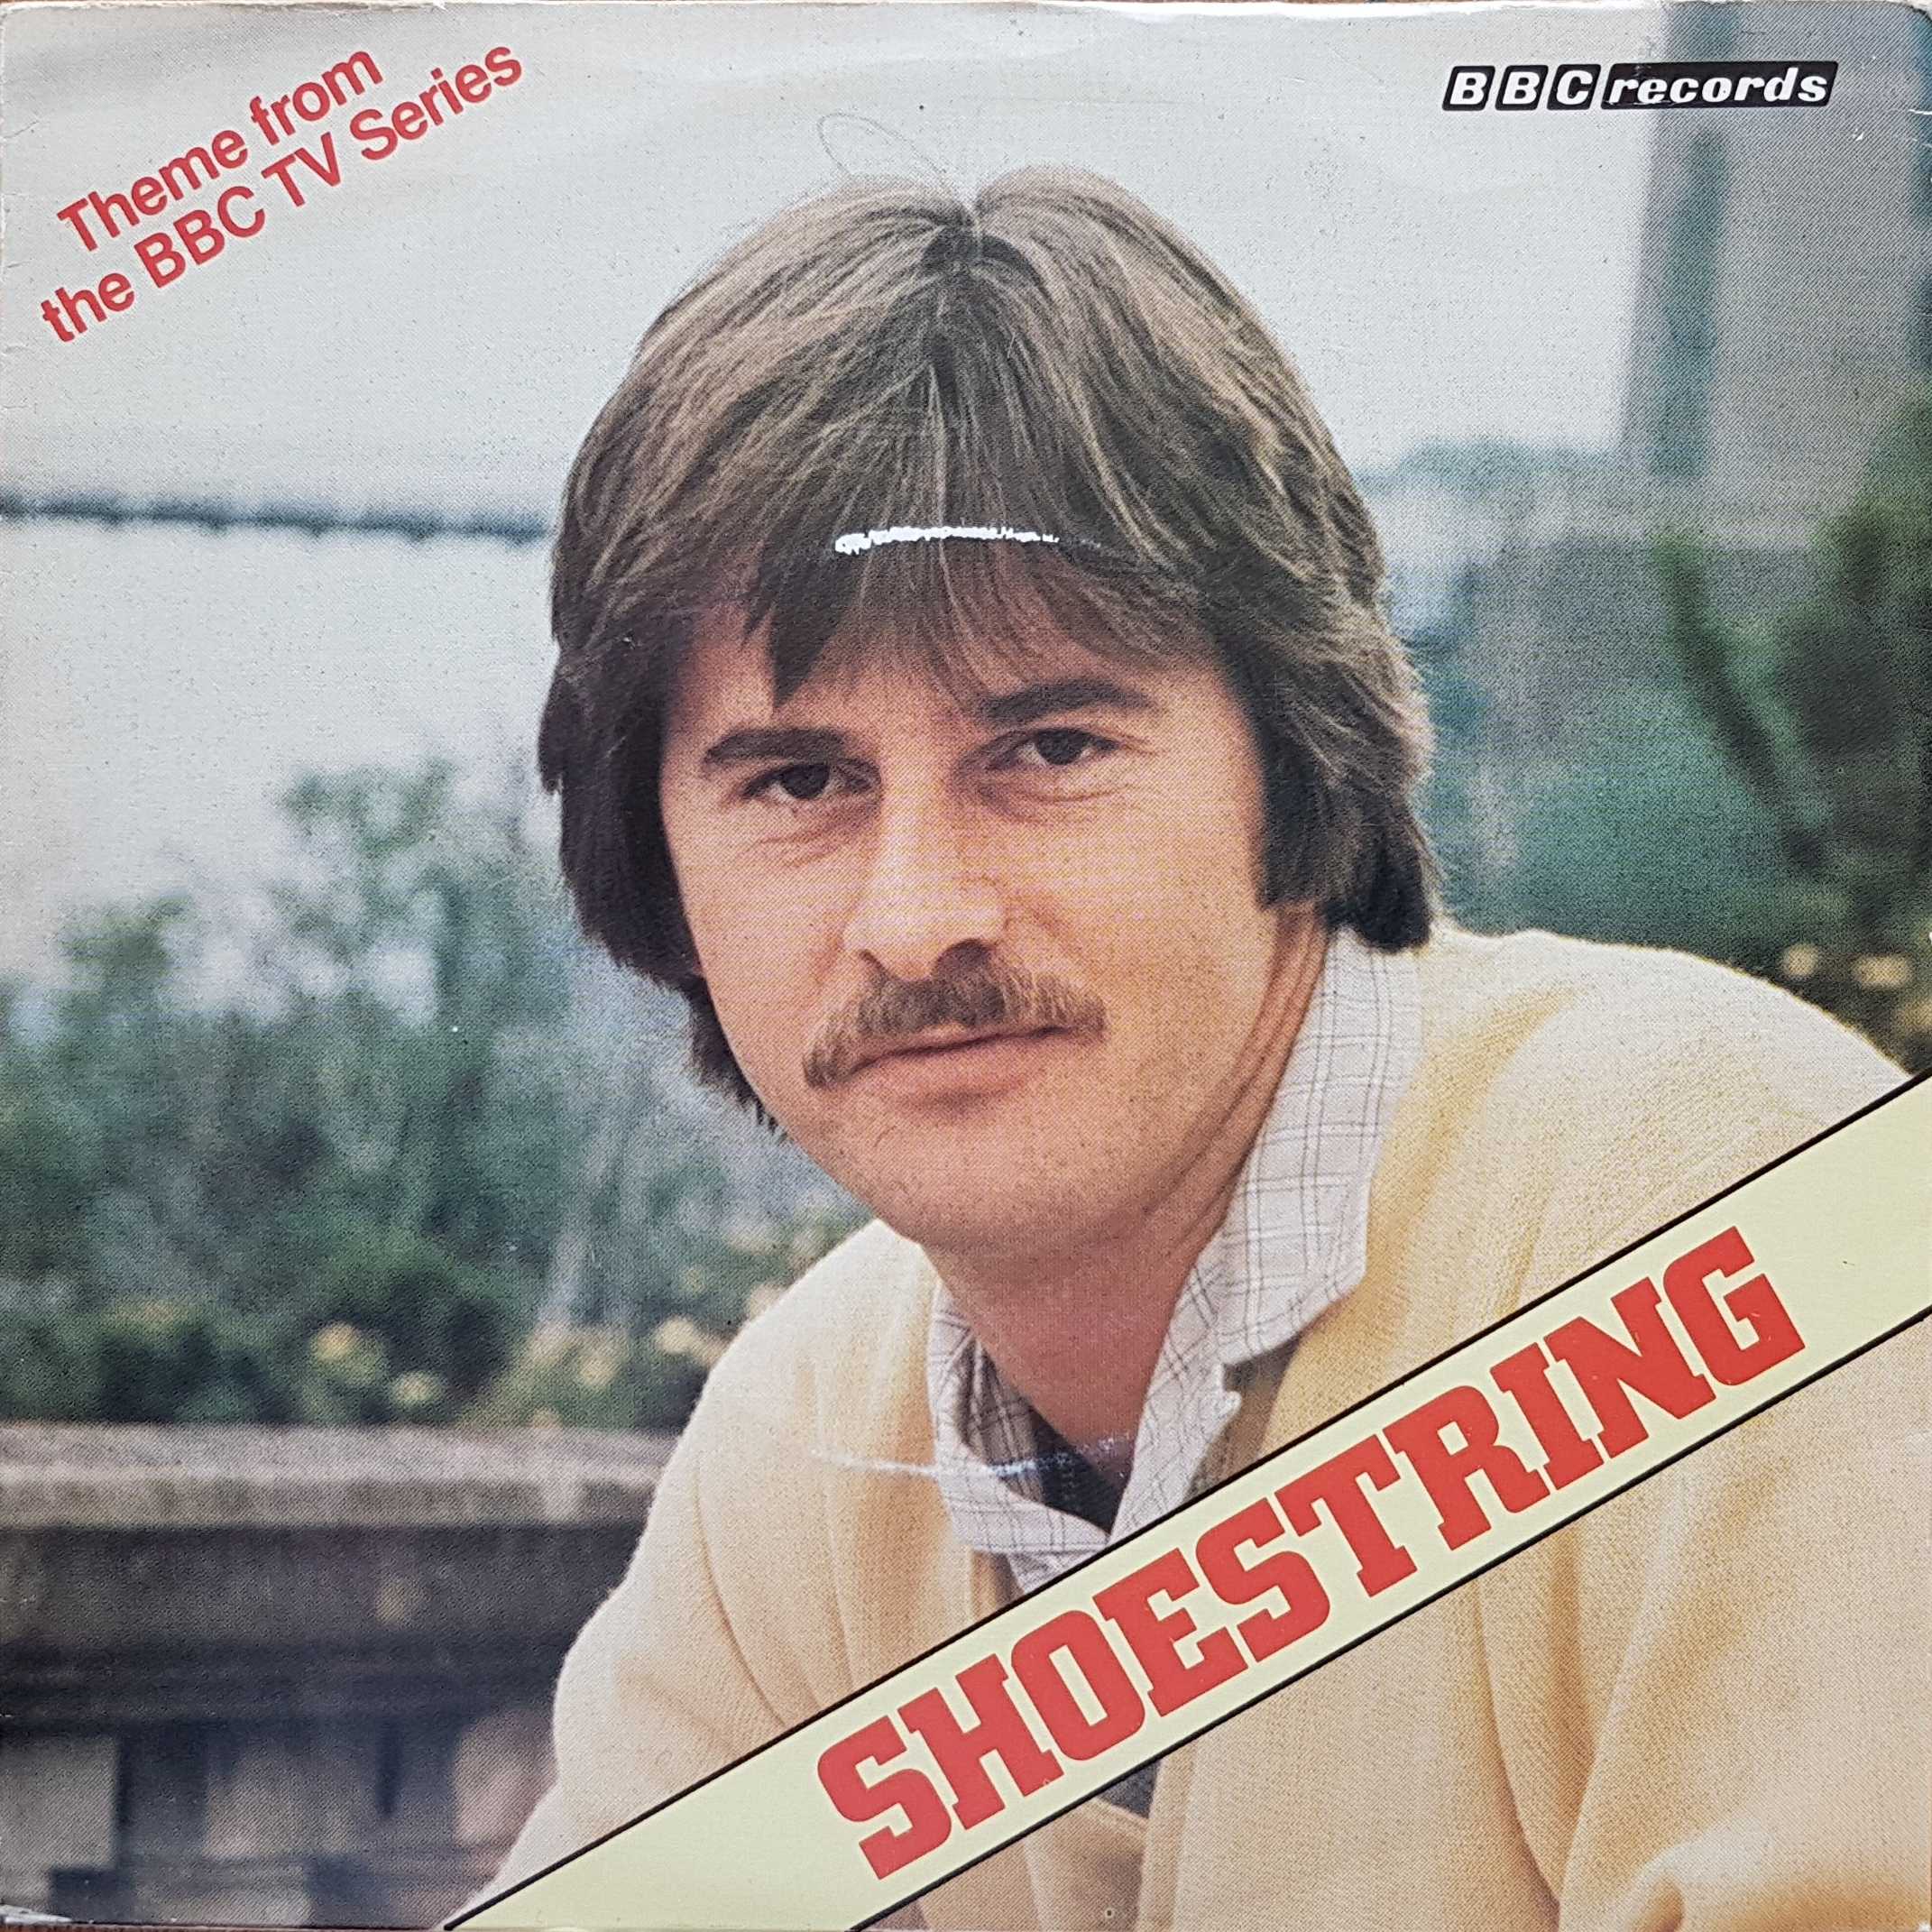 Picture of Shoestring by artist George Fenton from the BBC singles - Records and Tapes library